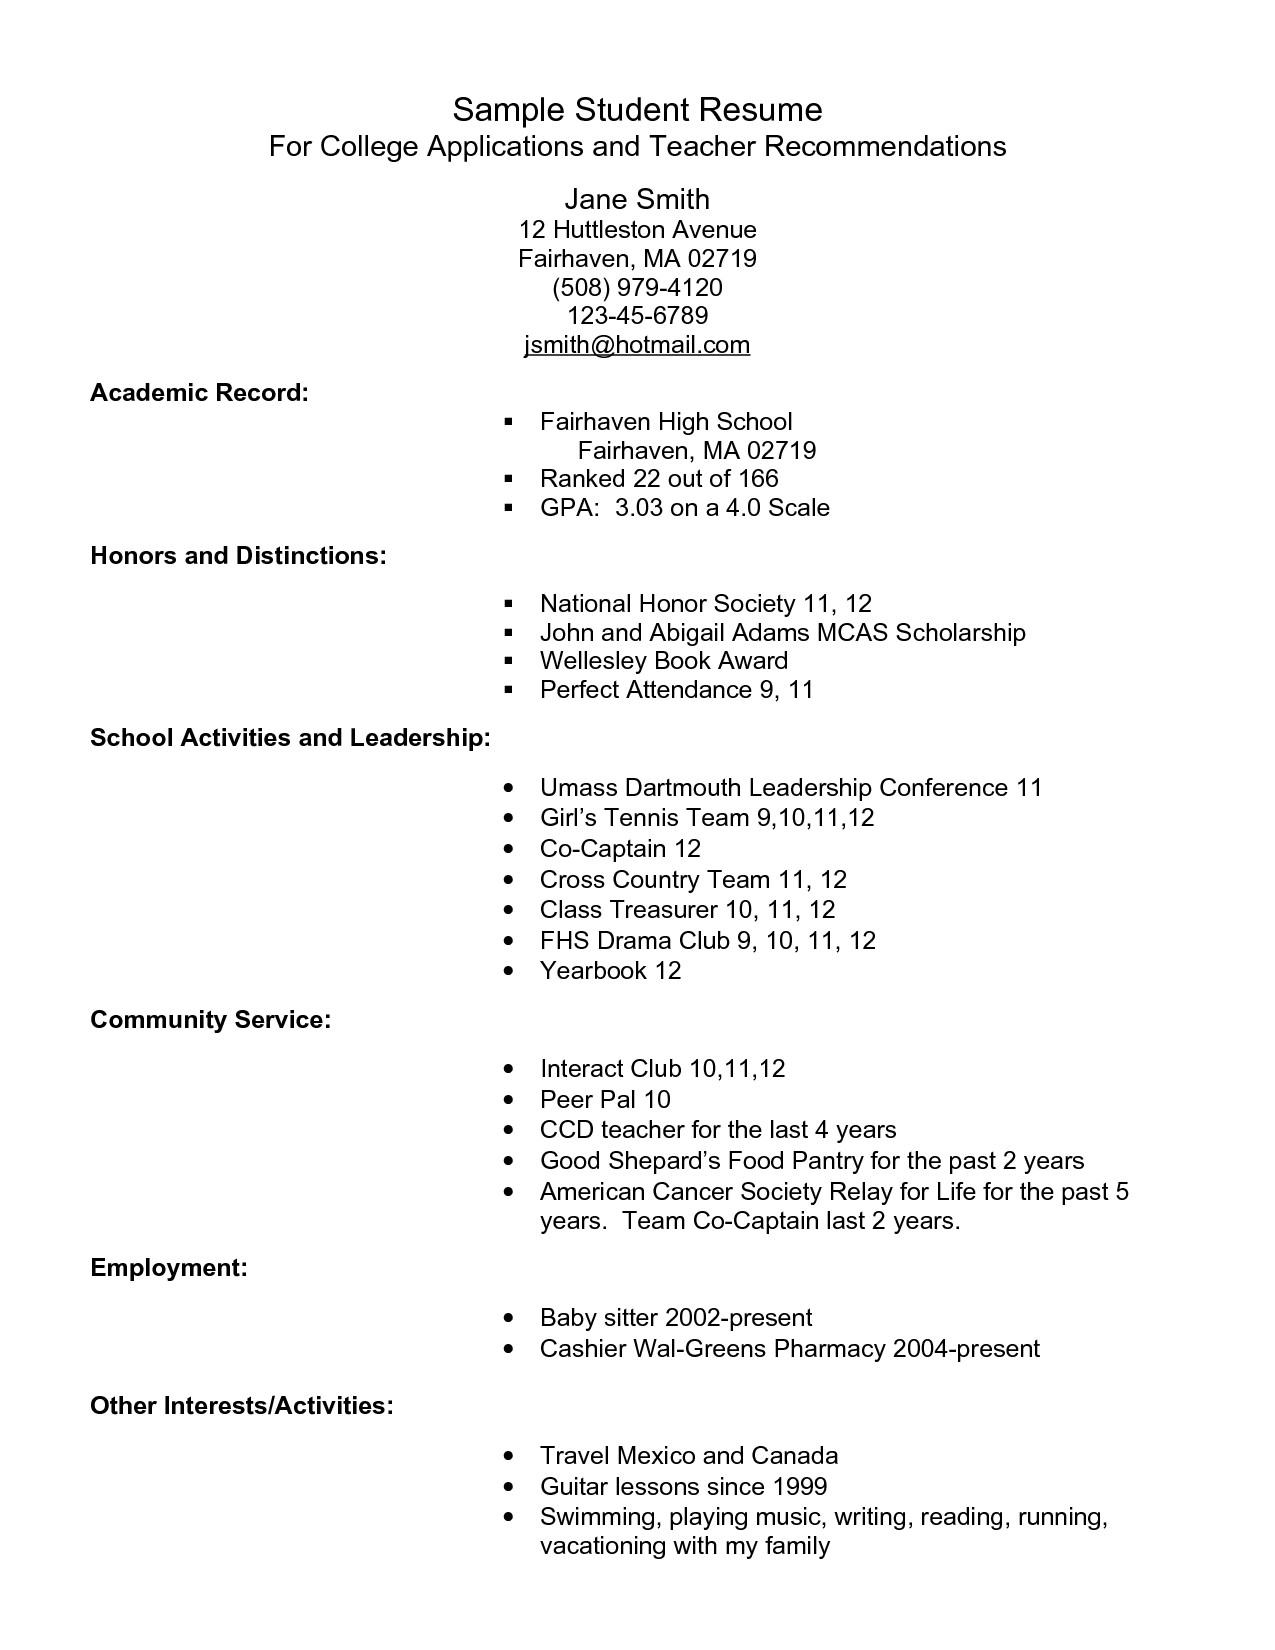 Sample Resume for Students Applying to University Example Resume for High School Students for College